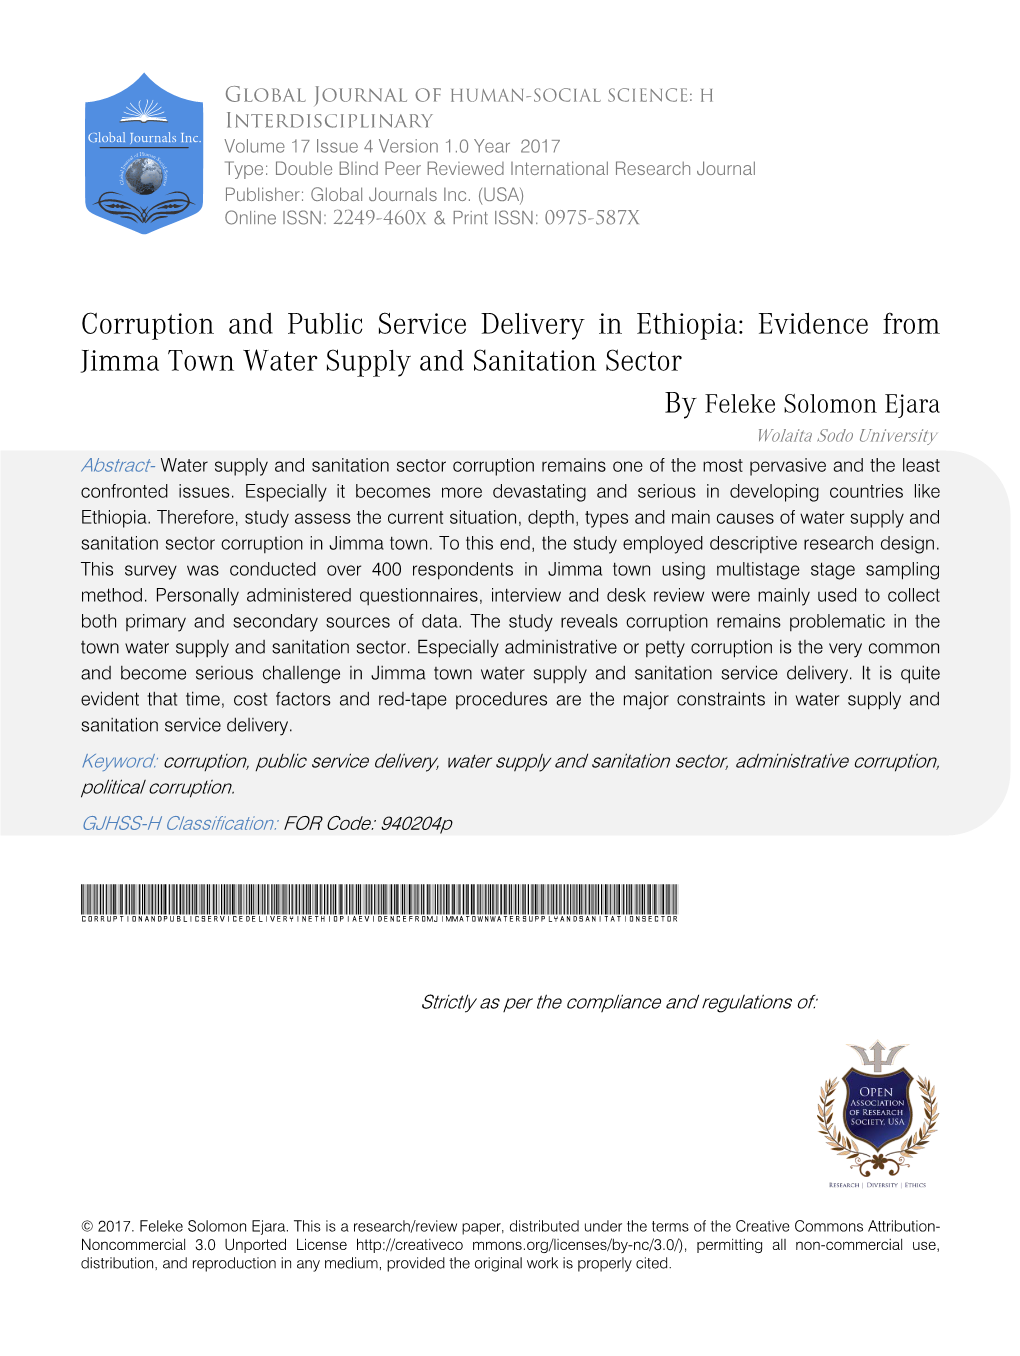 Evidence from Jimma Town Water Supply and Sanitation Sector